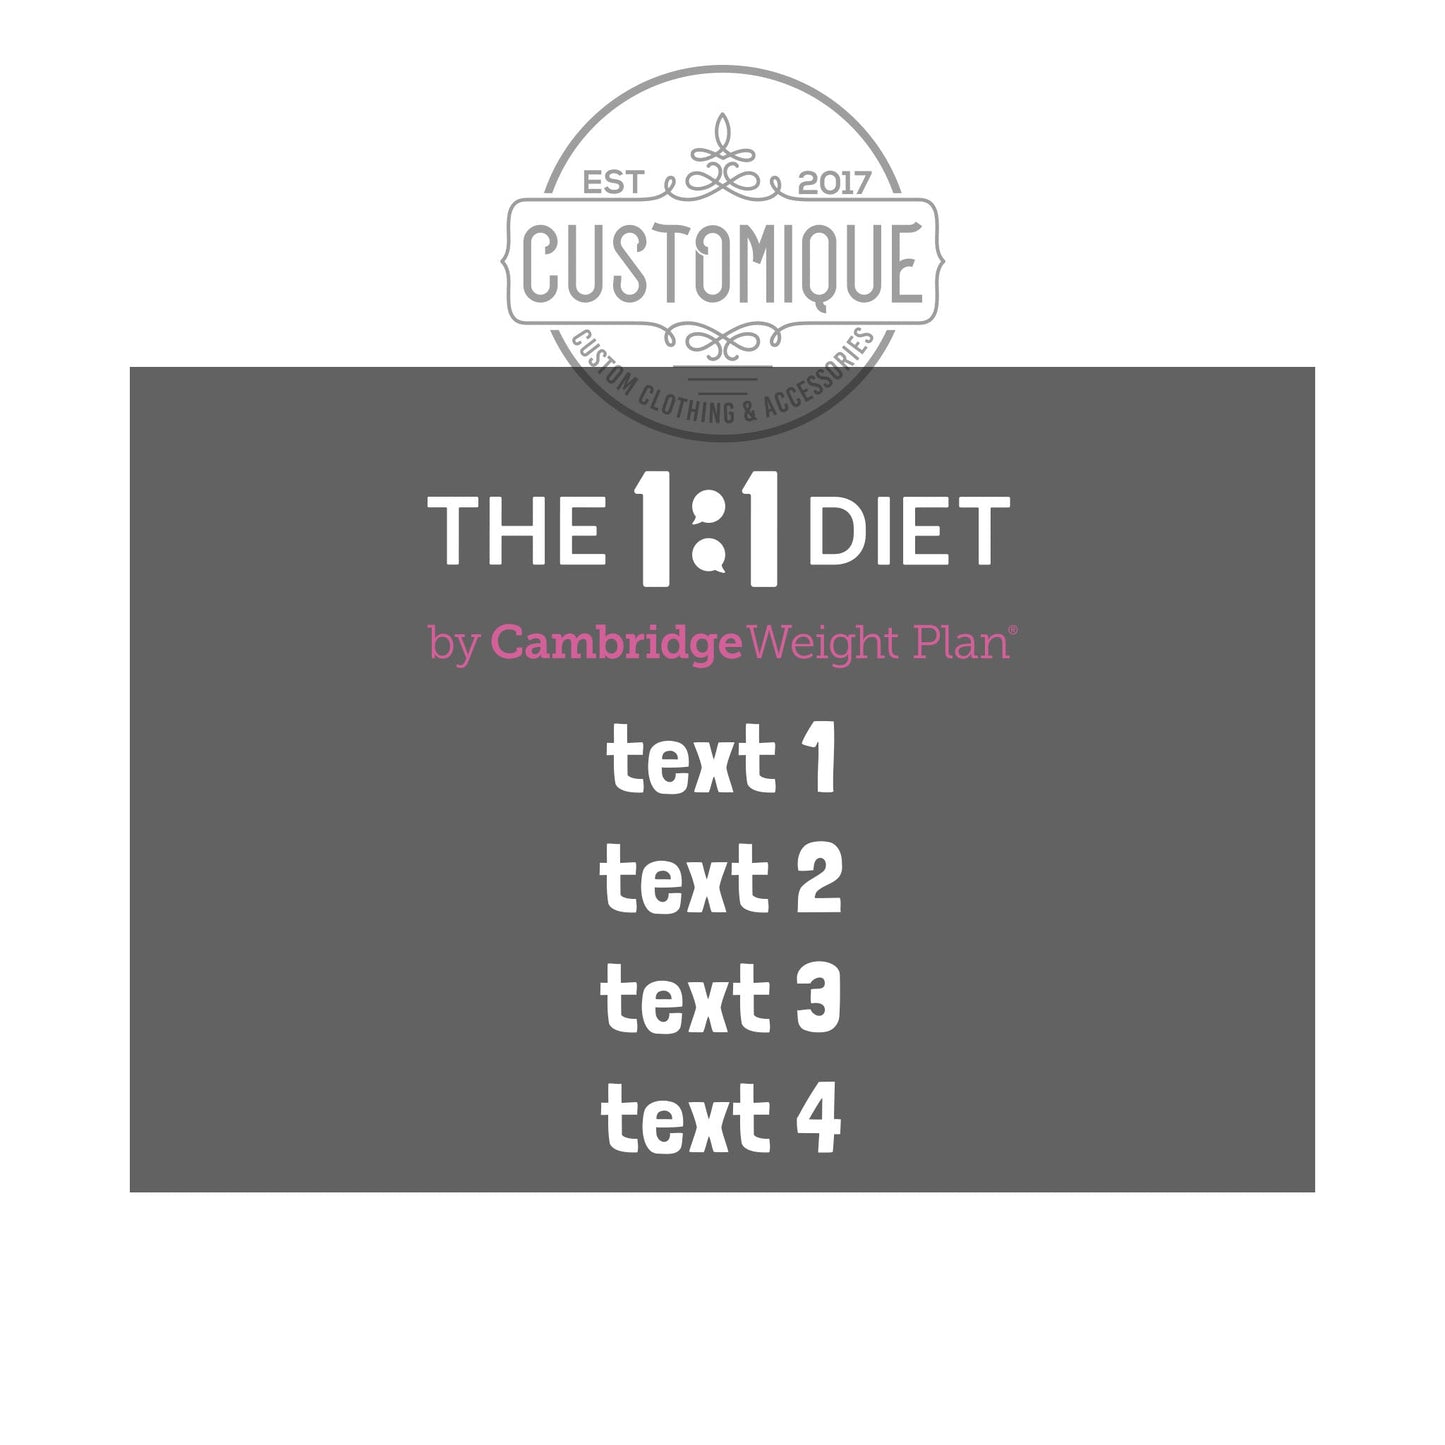 NEW PRODUCT The 1:1 Diet - Rear Car Windscreen Cling